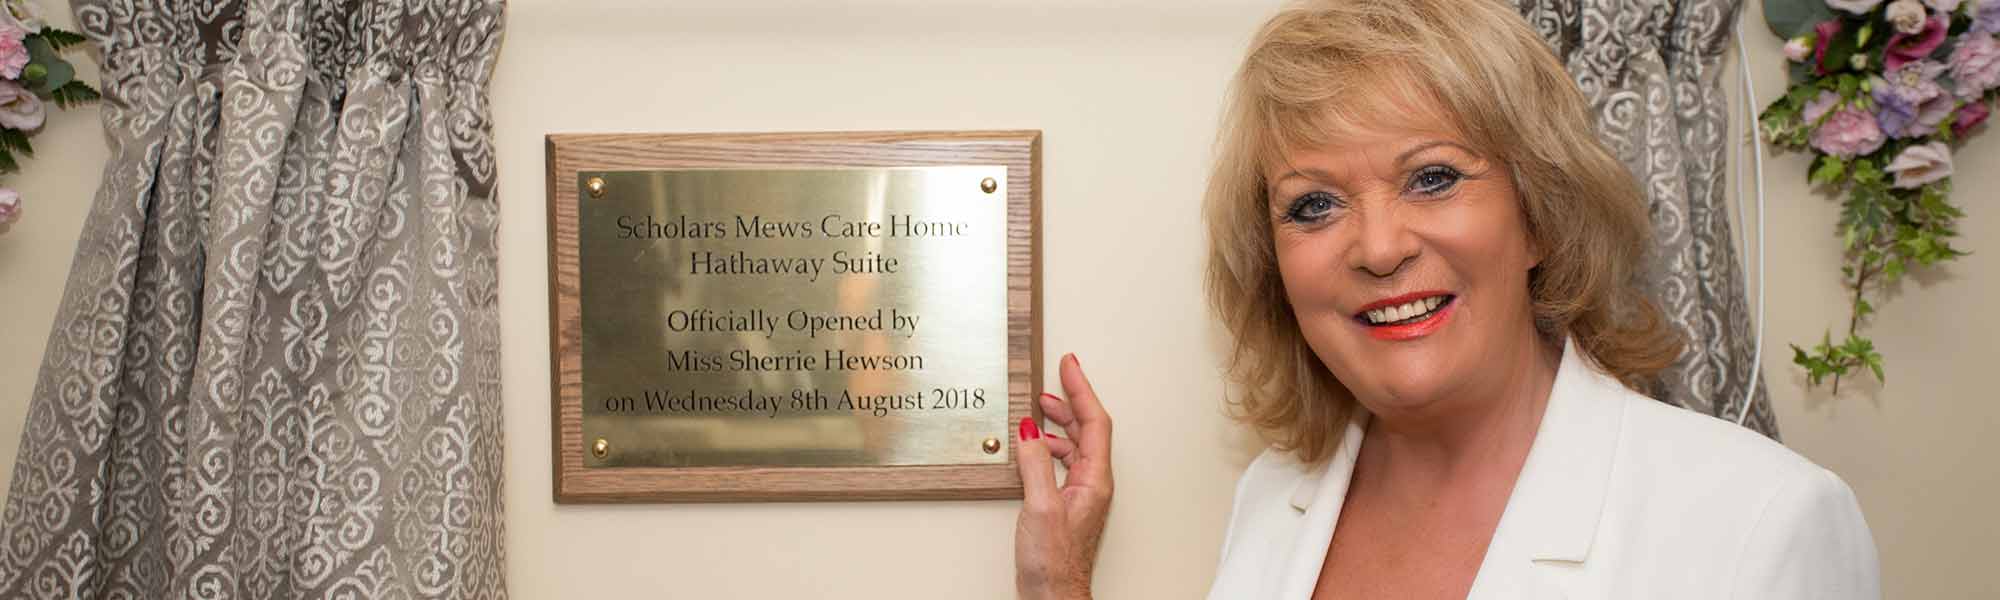 Sherrie Hewson Opening Hathaway Suite at Scholars Mews Care Home